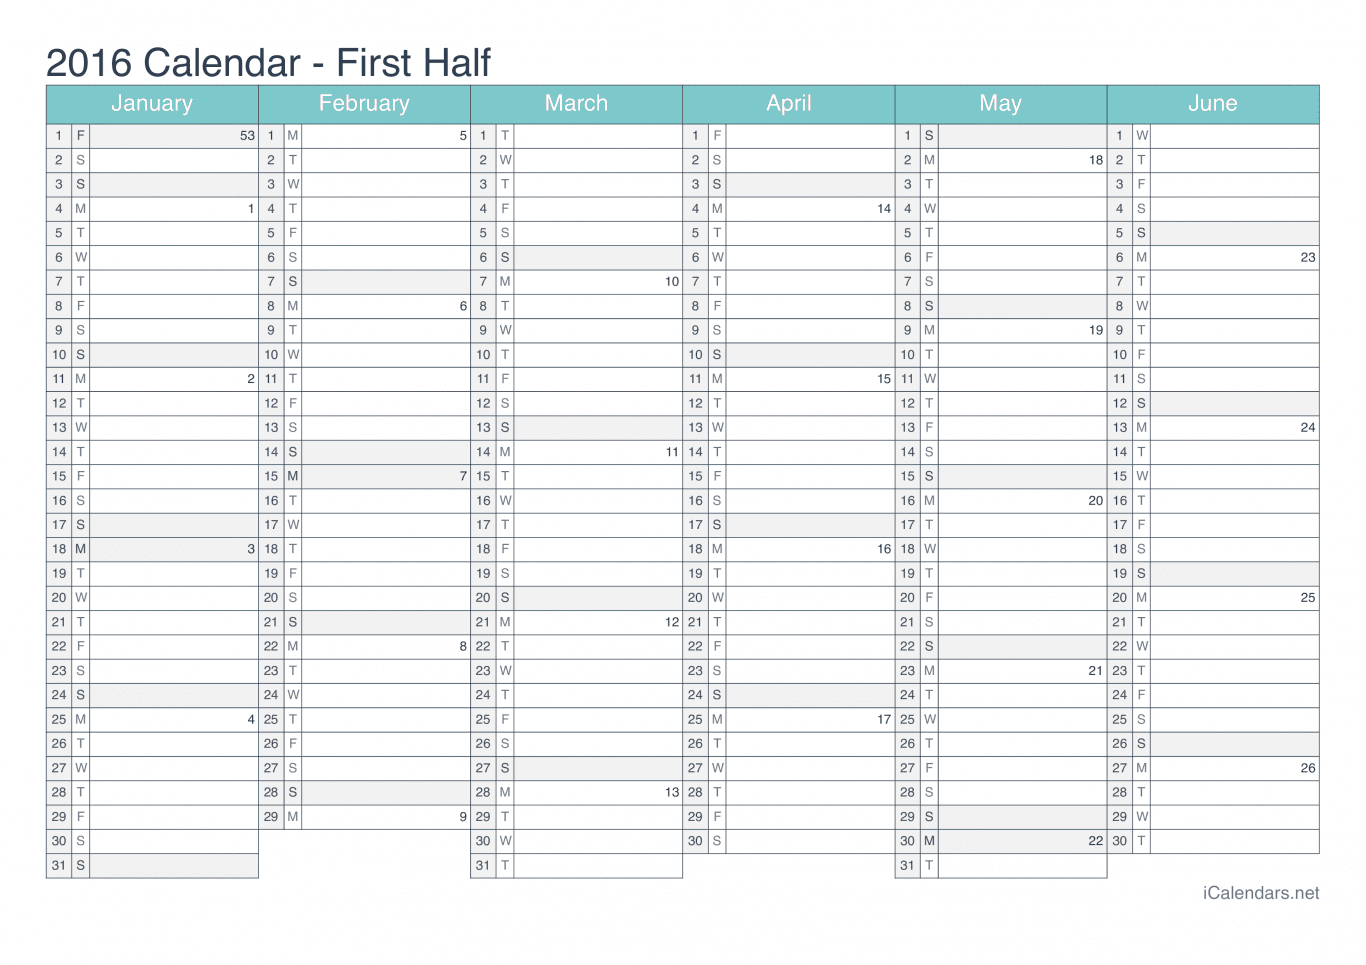 2016 Half year calendar with week numbers - Turquoise